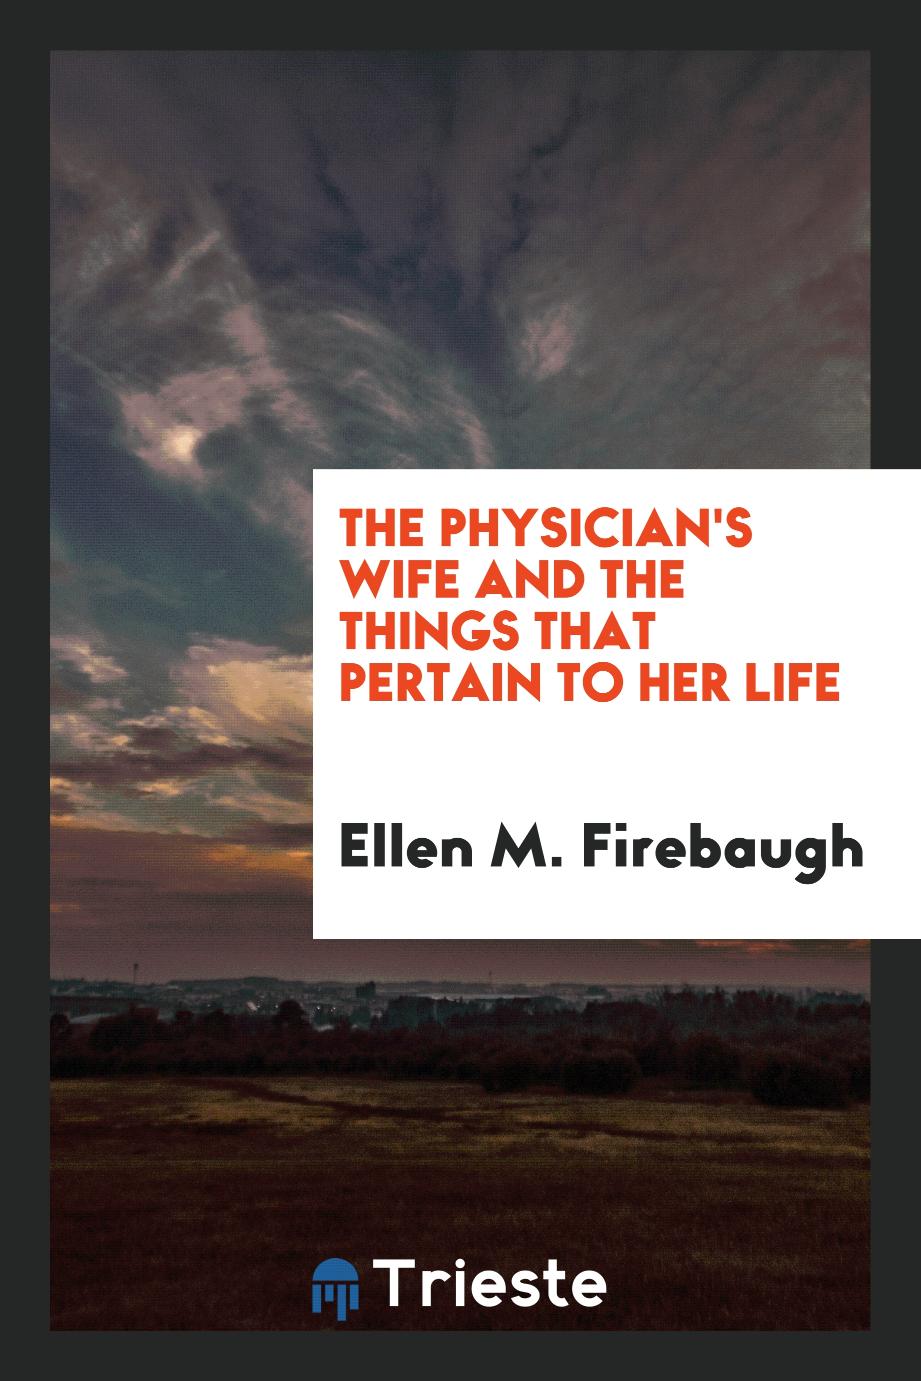 The physician's wife and the things that pertain to her life